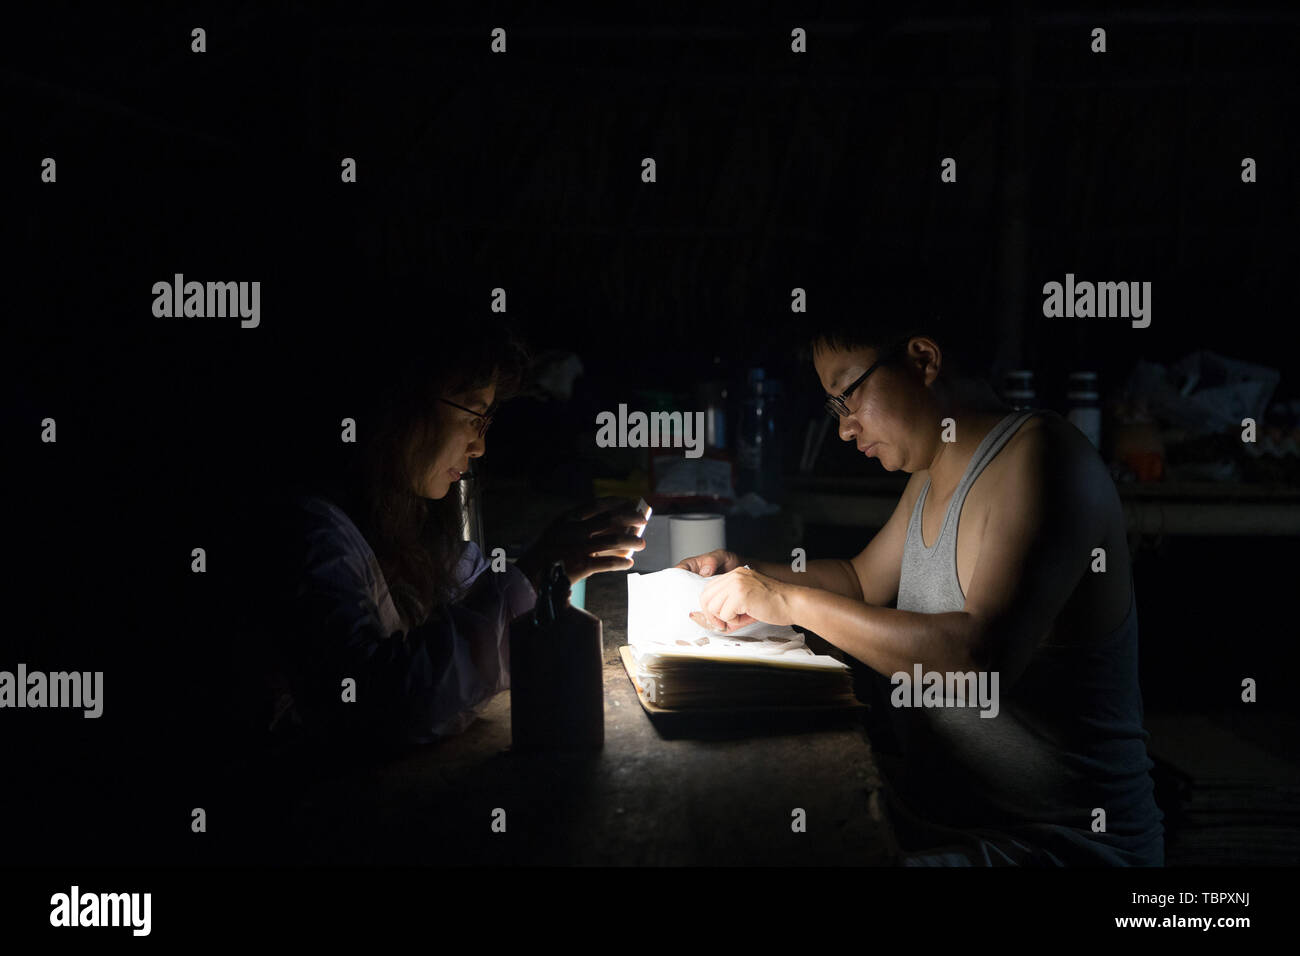 (190603) -- TAMANTHI, June 3, 2019 (Xinhua) -- Chinese researchers check plant samples at their campsite in the Tamanthi Wildlife Sanctuary in north Myanmar, May 30, 2019. A China-Myanmar joint field expedition, made up with researchers from the Southeast Asia Biodiversity Research Institute of the Chinese Academy of Sciences (CAS-SEABRI) and the Natural Resources and Environmental Conservation of Myanmar, is doing researches on the biodiversity of the Tamanthi Wildlife Sanctuary in northern Myanmar. The expedition, the eighth of its kind since 2014, began on May 14 and will last till June 15. Stock Photo